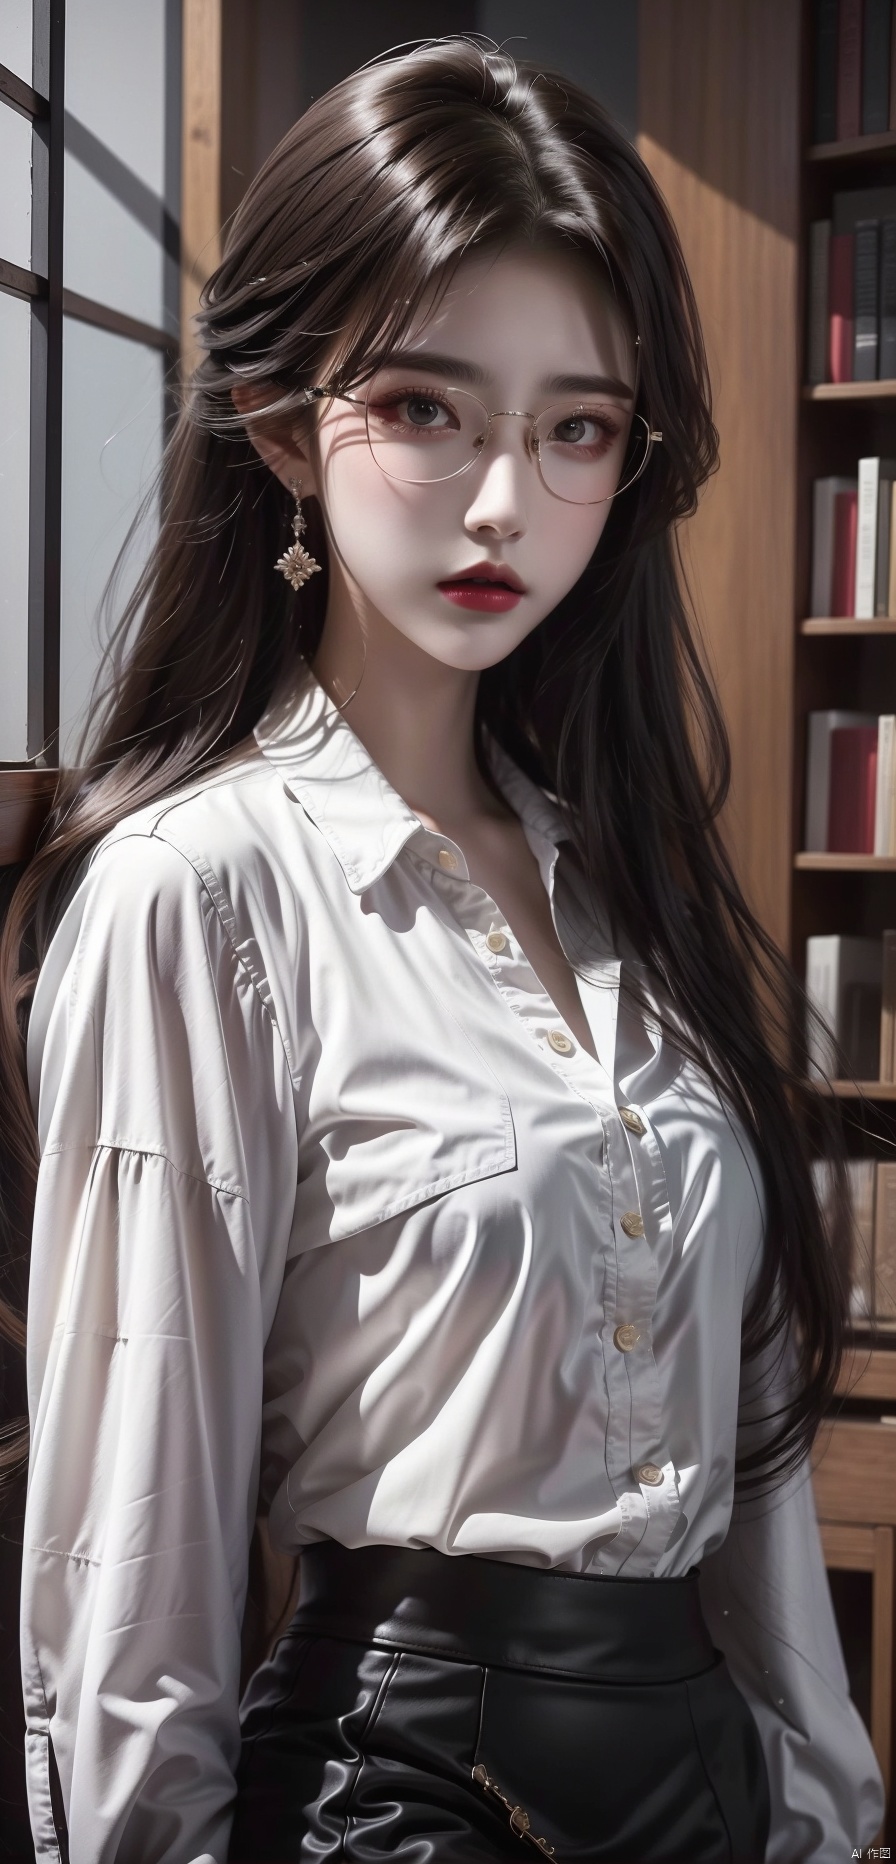  Brown curly hair, long hair, black framed glasses, royal sister, wearing a white shirt, black leather skirt, academic sister, red lips, looking at the camera, girl, solo, portrait, black eyes, school library, masterpiece, cg, exquisite clothing, detailed scene portrayal, high-definition